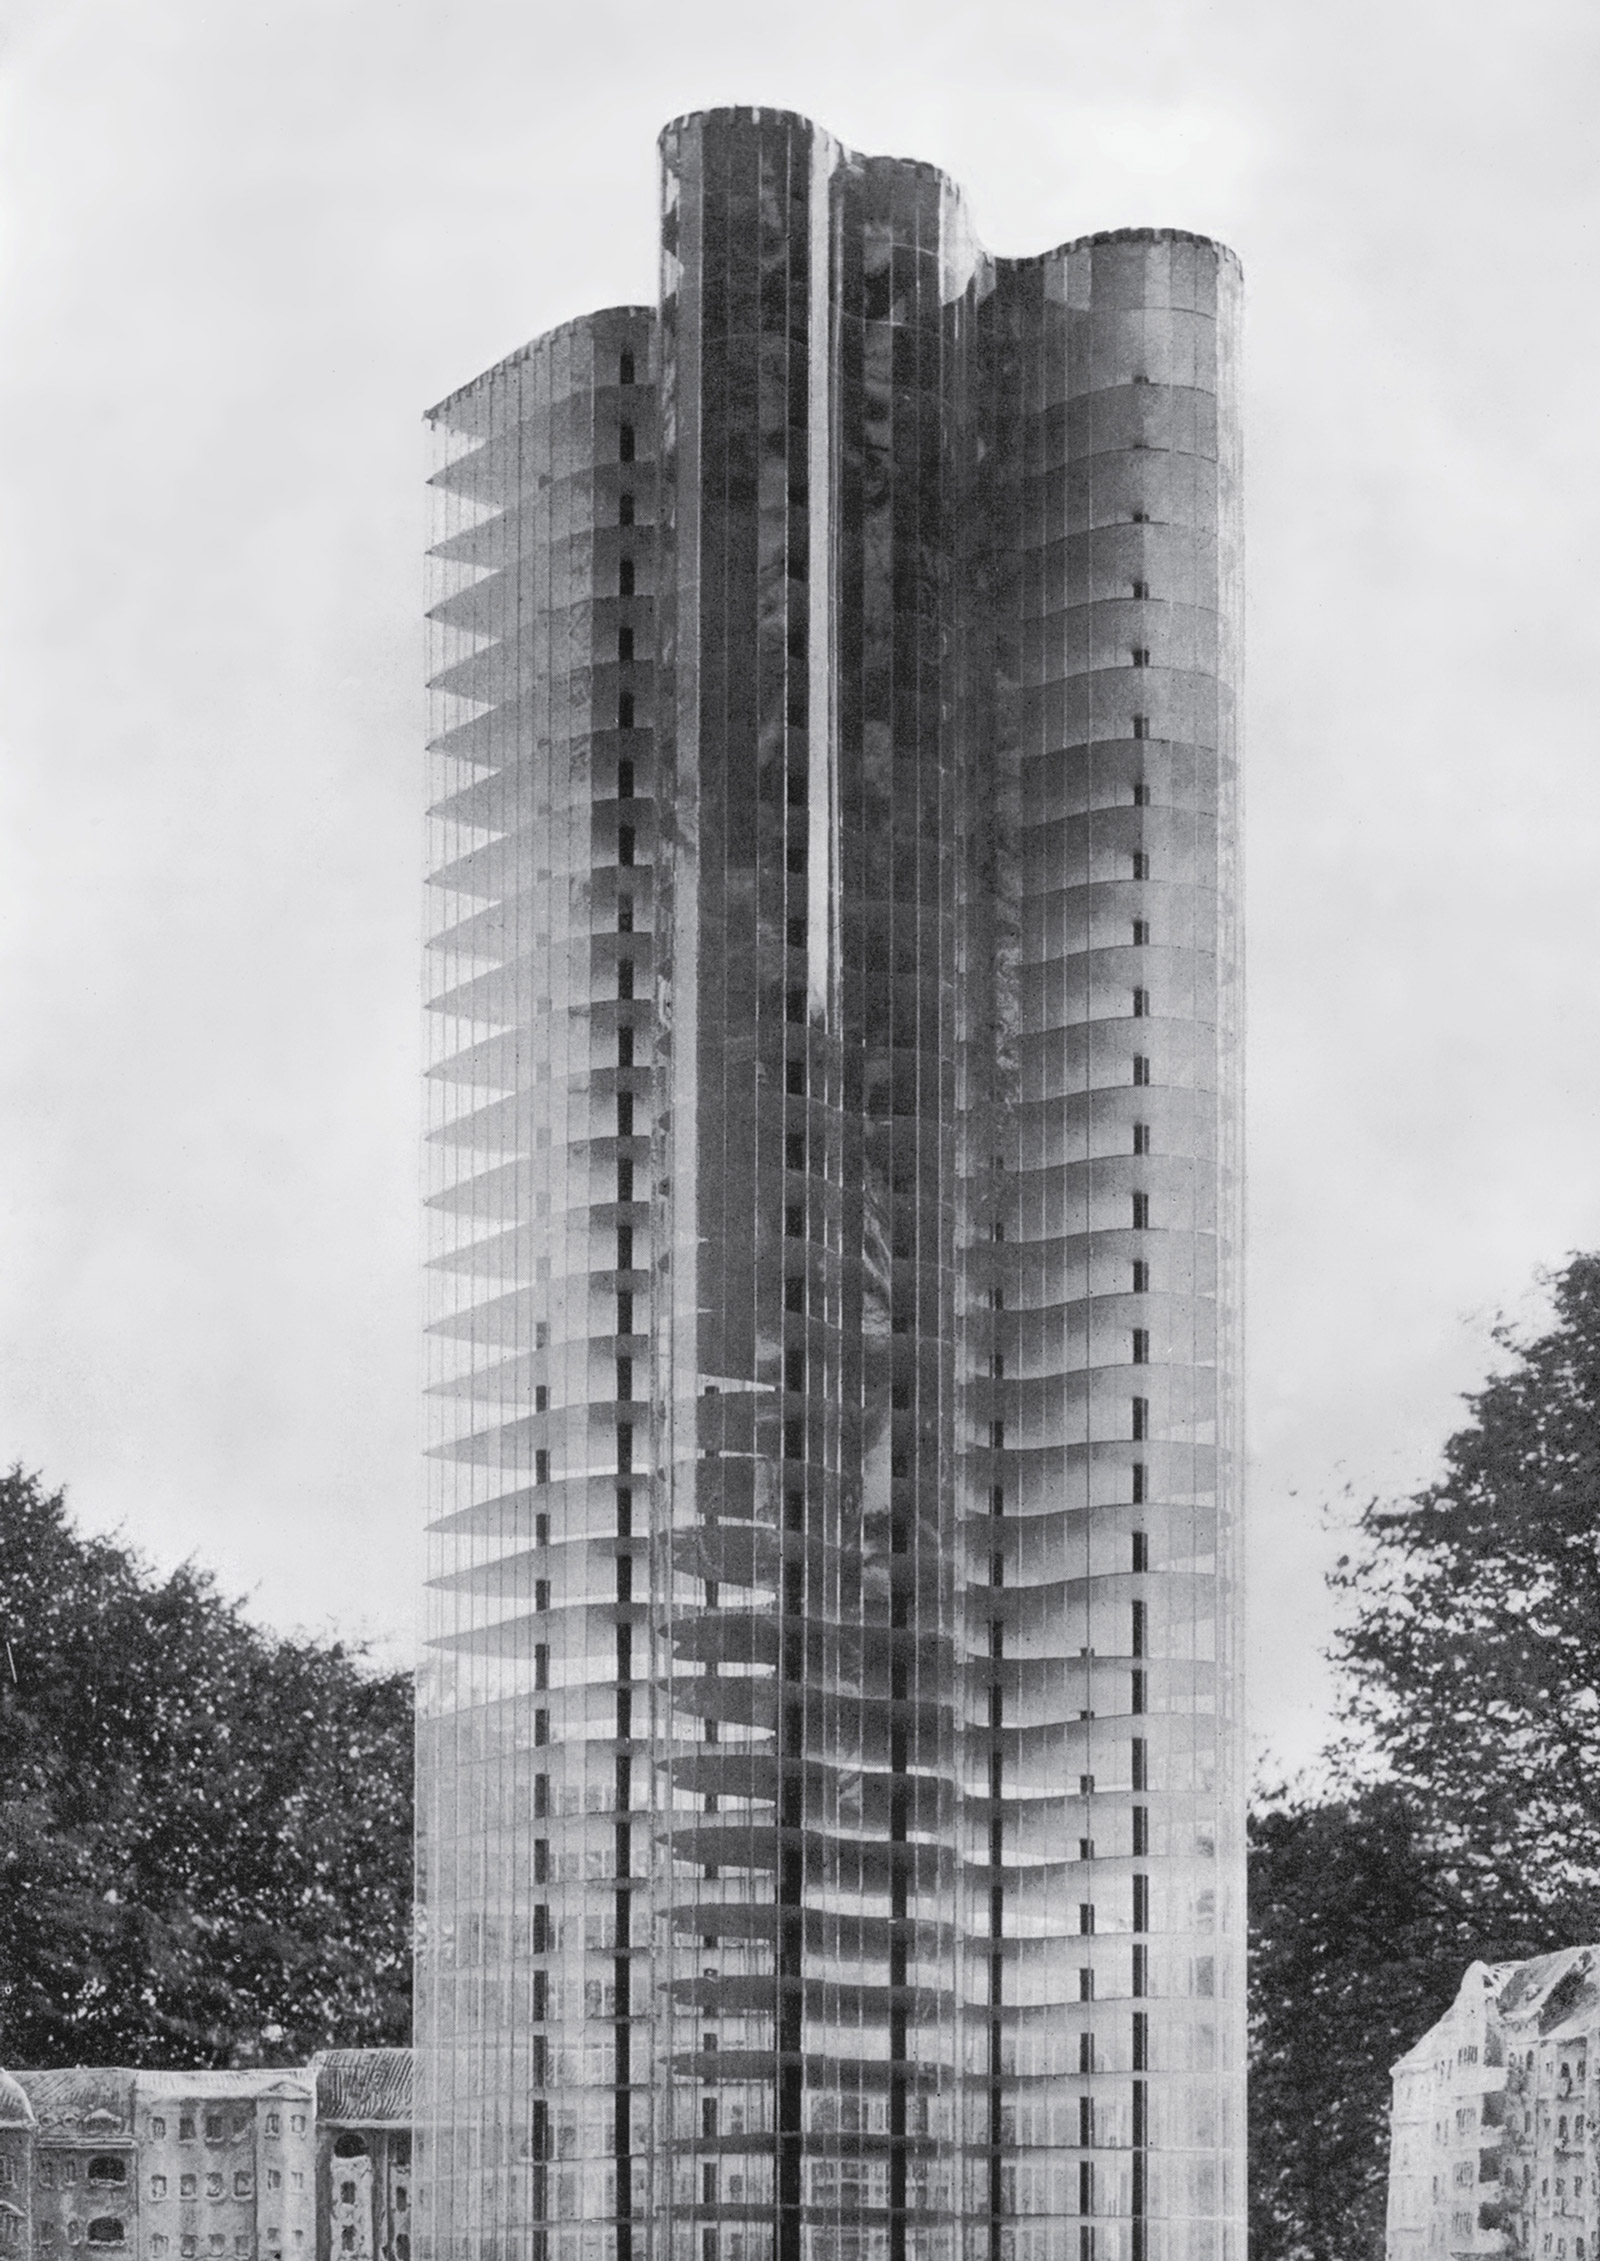 A photograph of the experimental model of nineteen twenty-two made for Mies van der Rohe’s Glass Skyscraper Project.